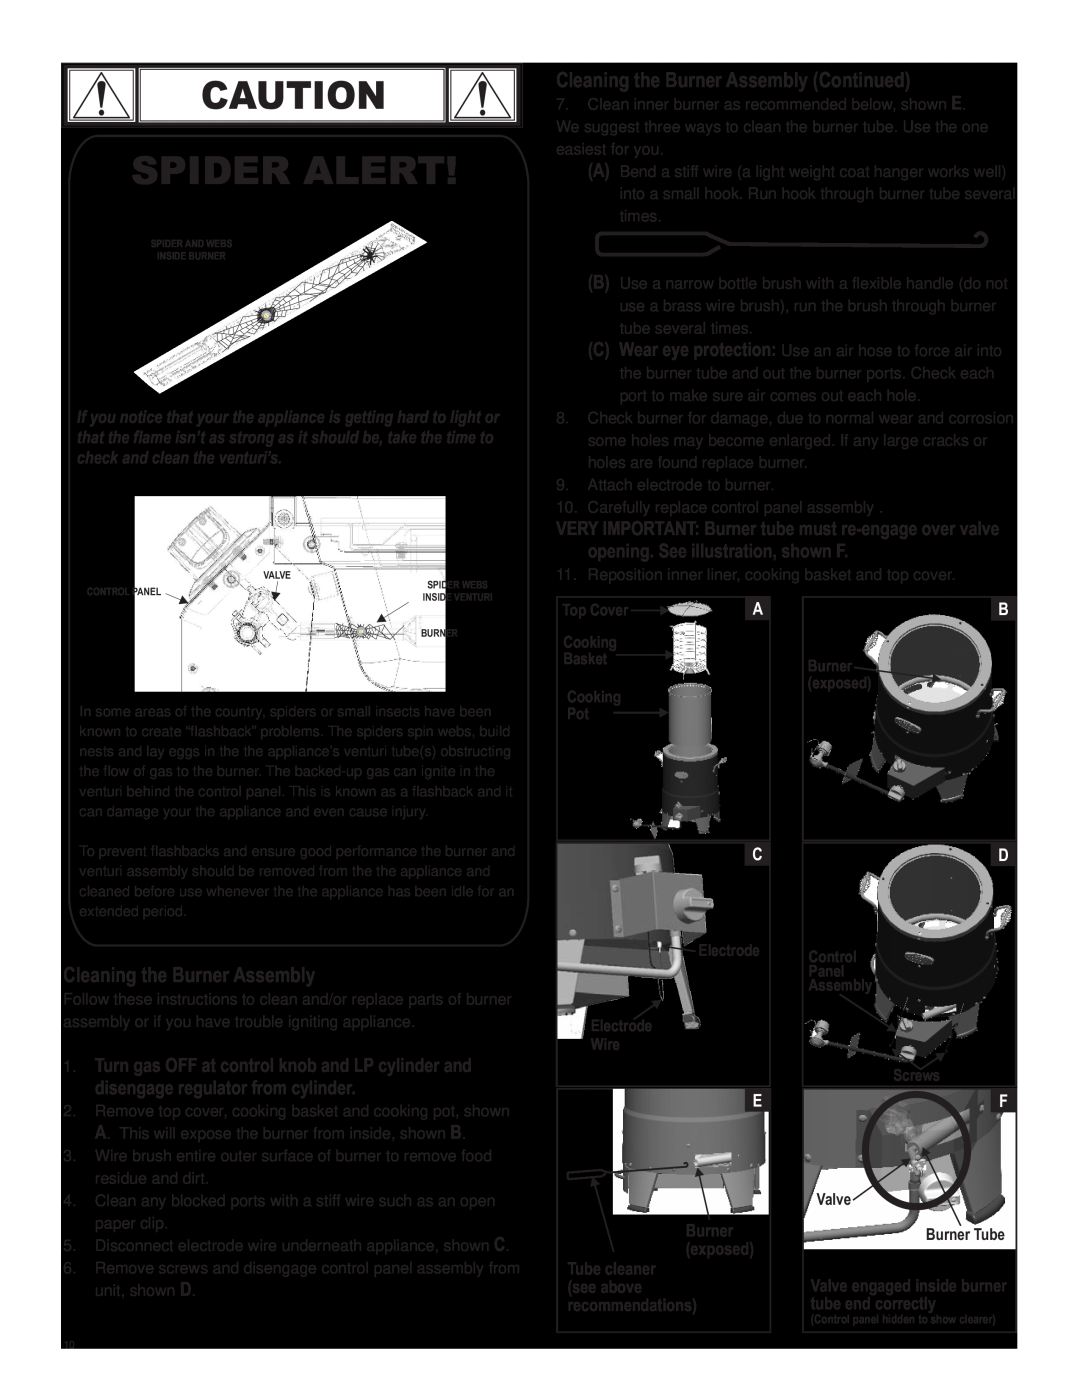 Char-Broil 10101480 manual Spider Alert, Cleaning the Burner Assembly Continued 